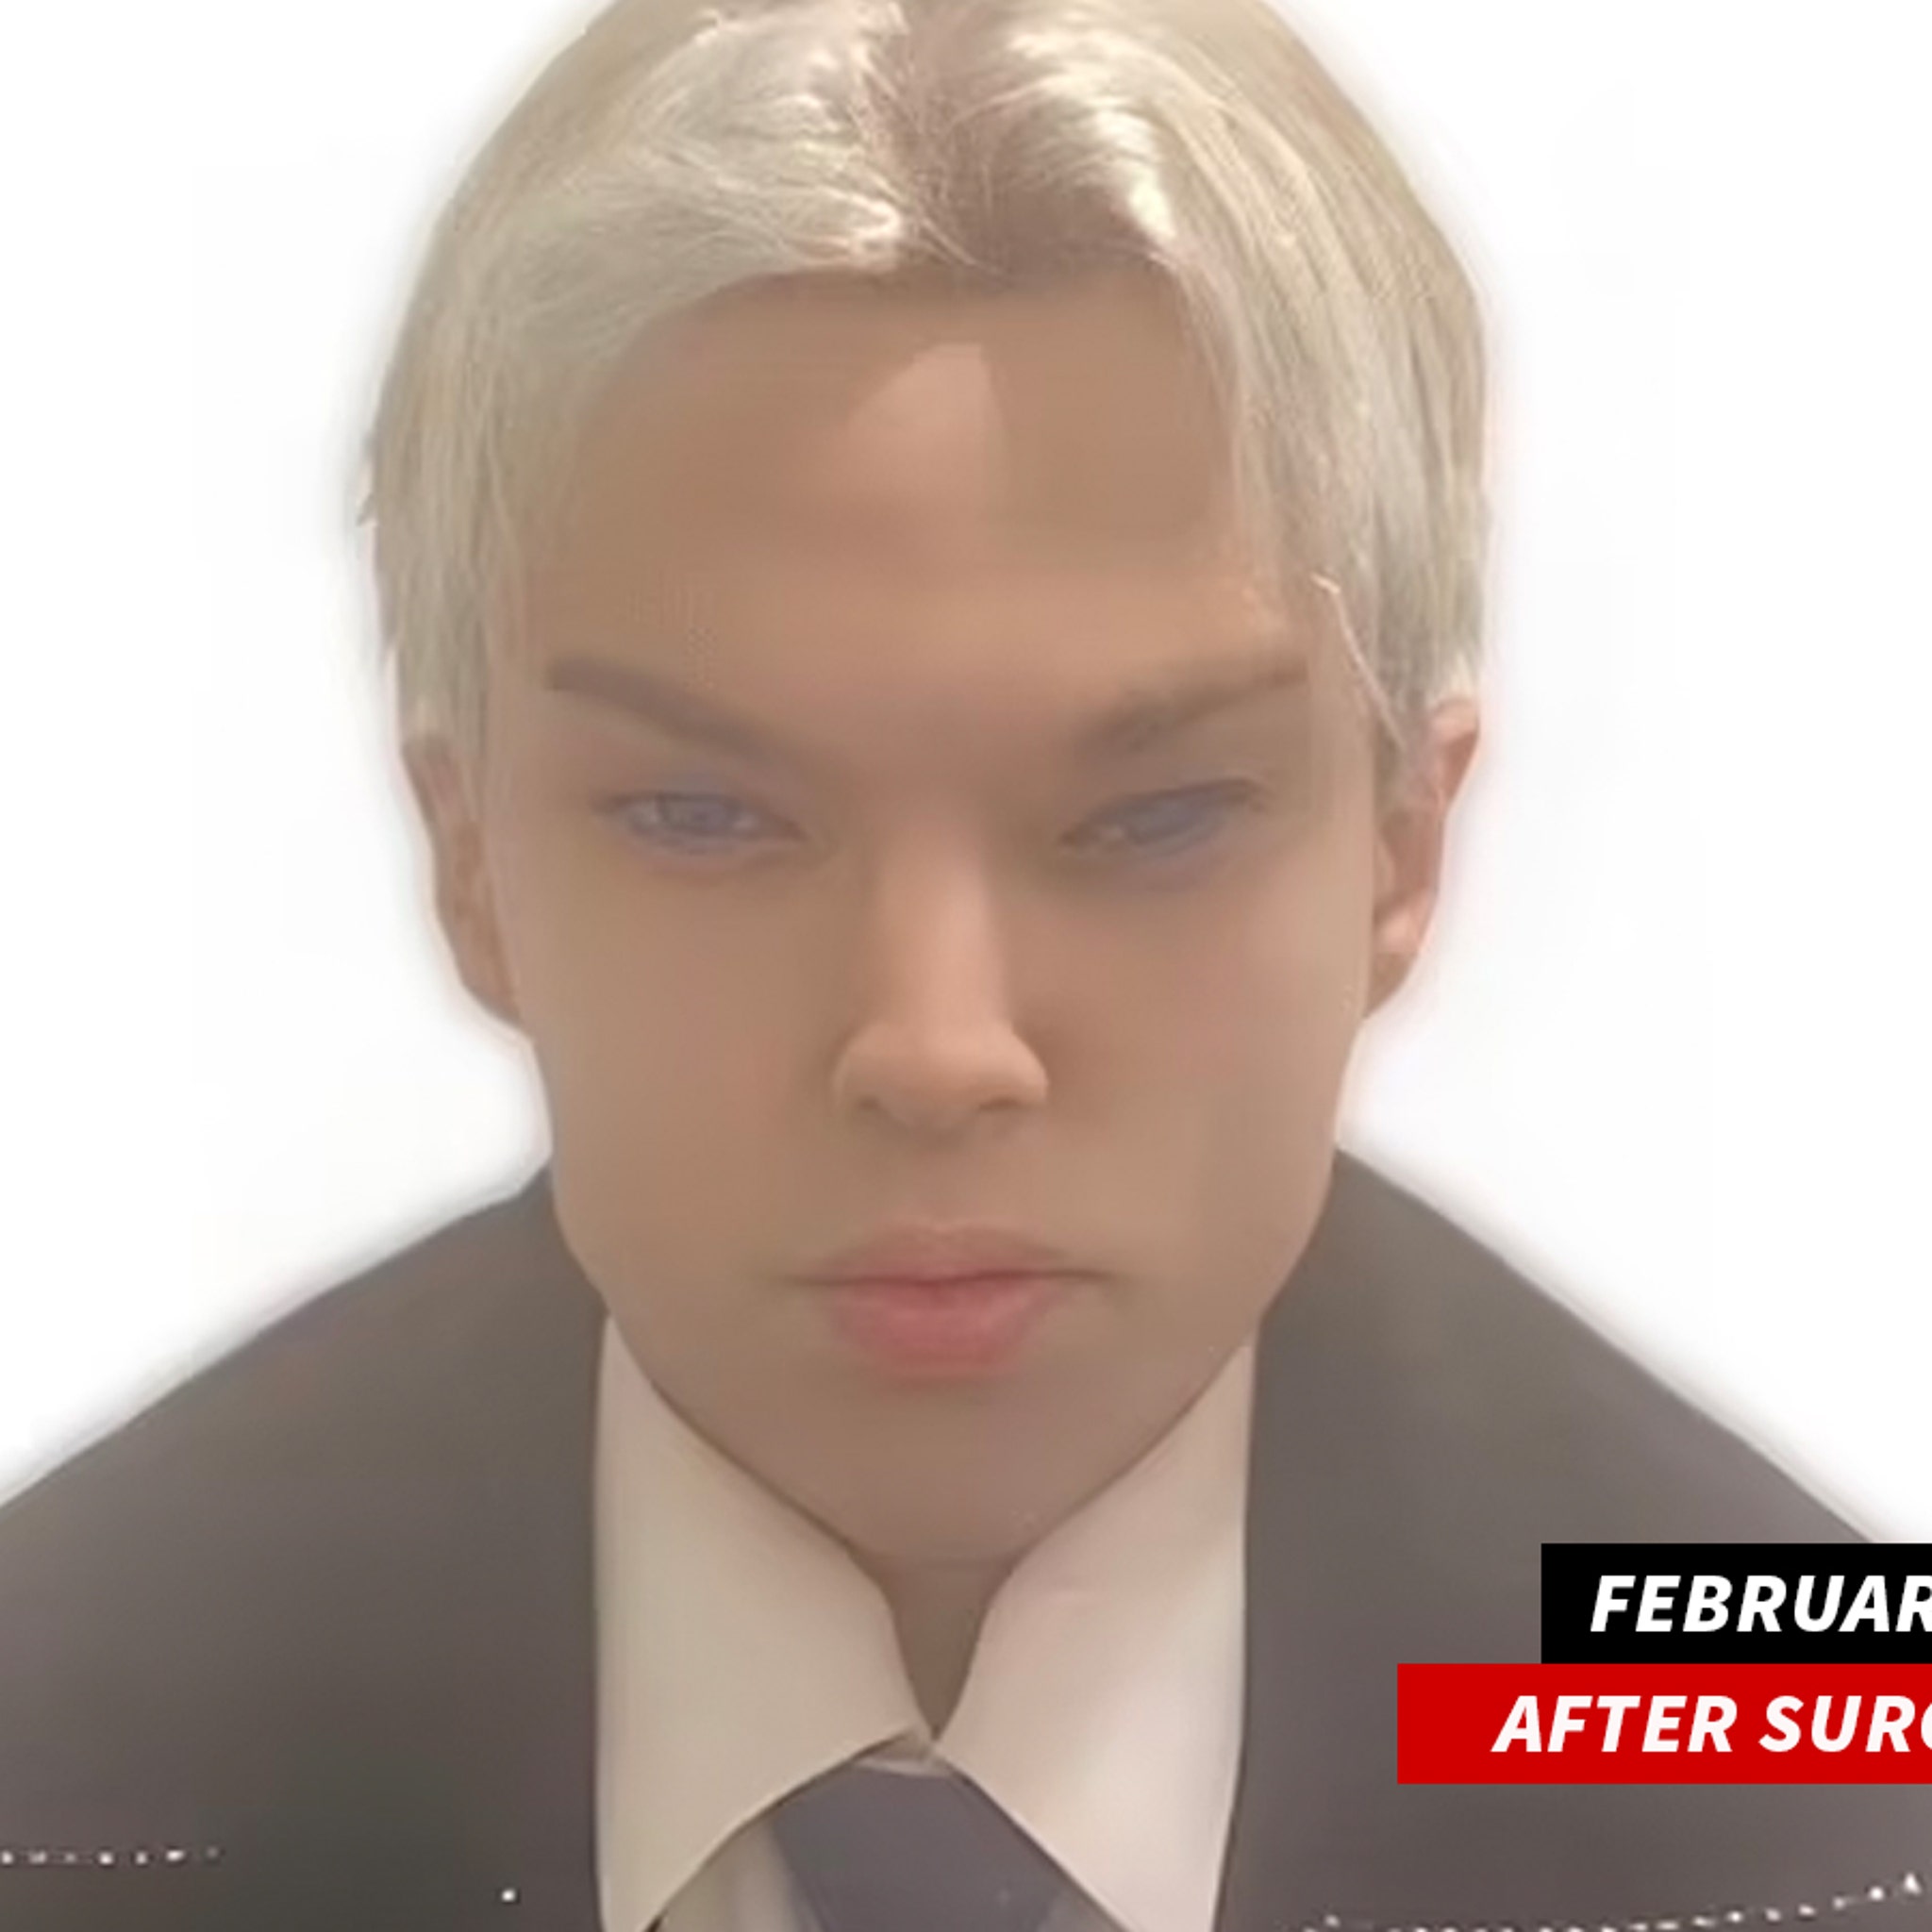 Actor Dies After 12 Plastic Surgeries To Look Like Bts Star Jimin